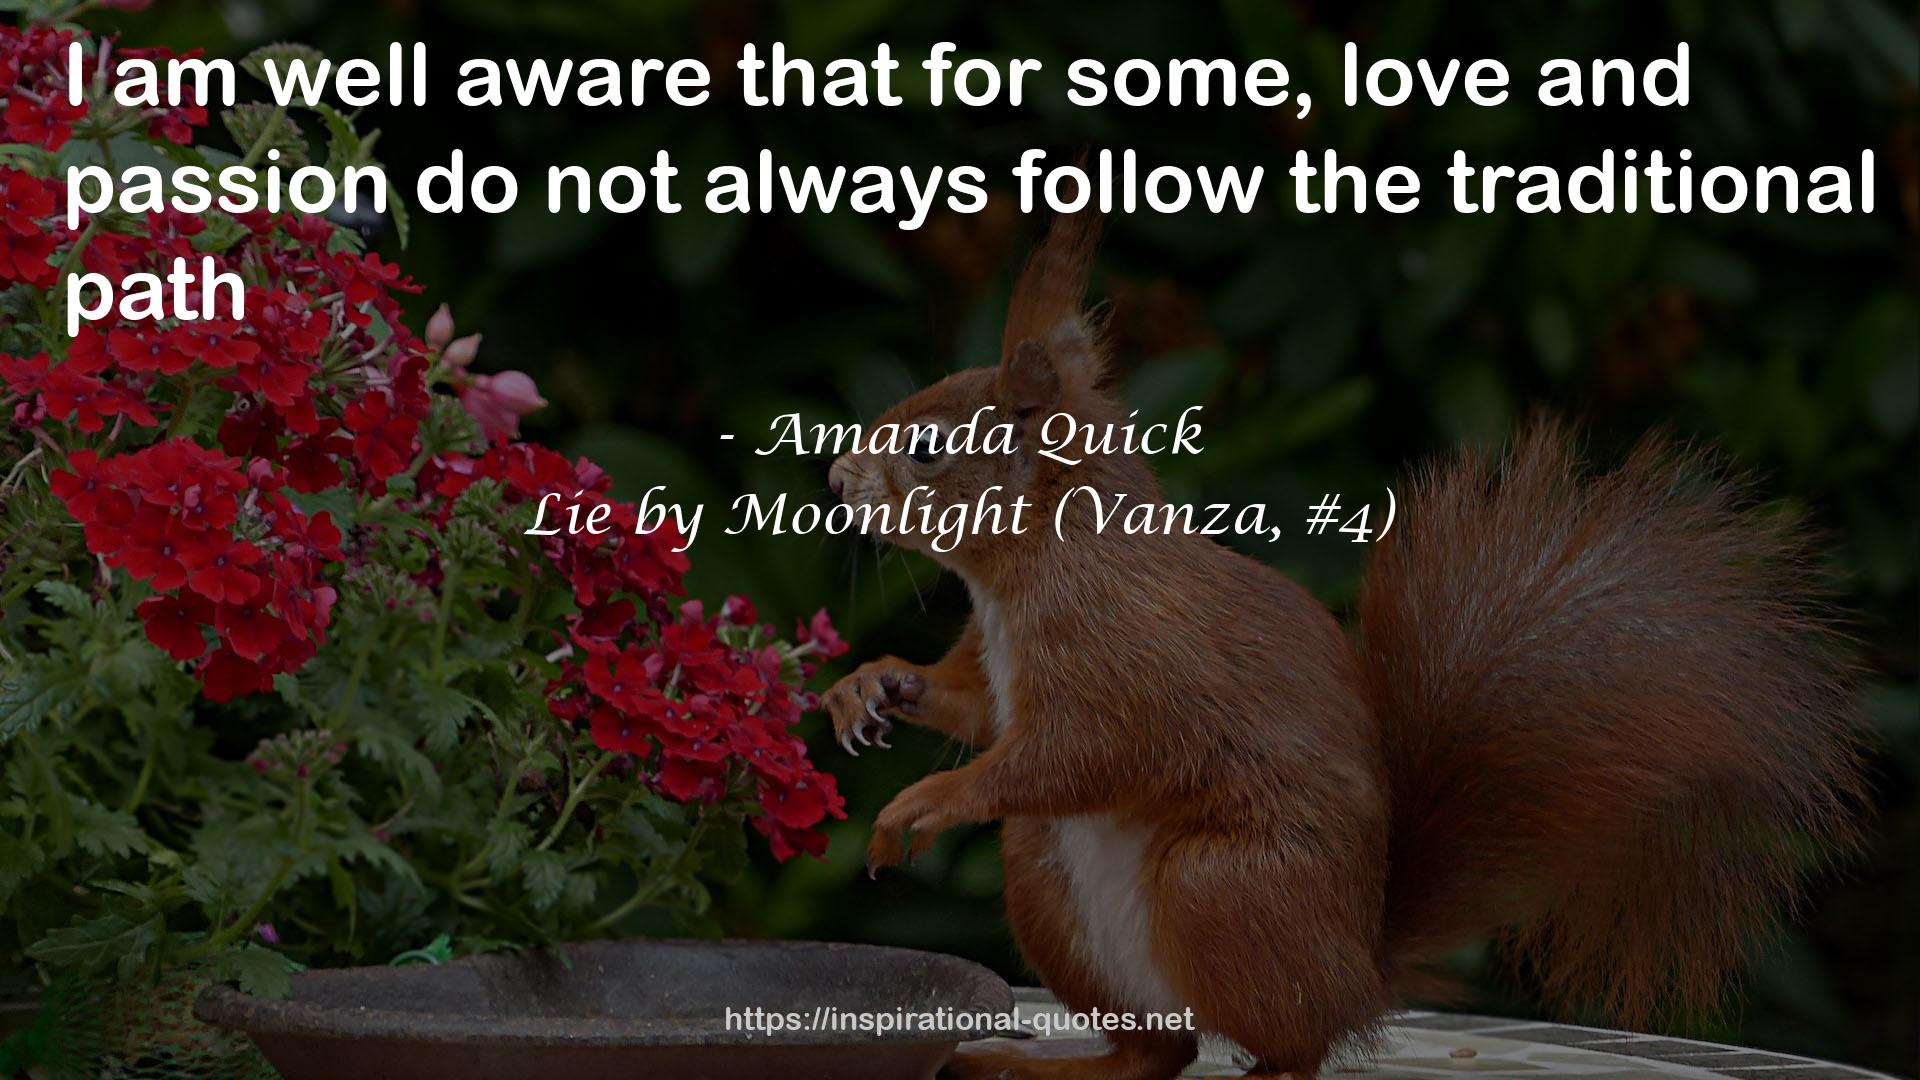 Lie by Moonlight (Vanza, #4) QUOTES